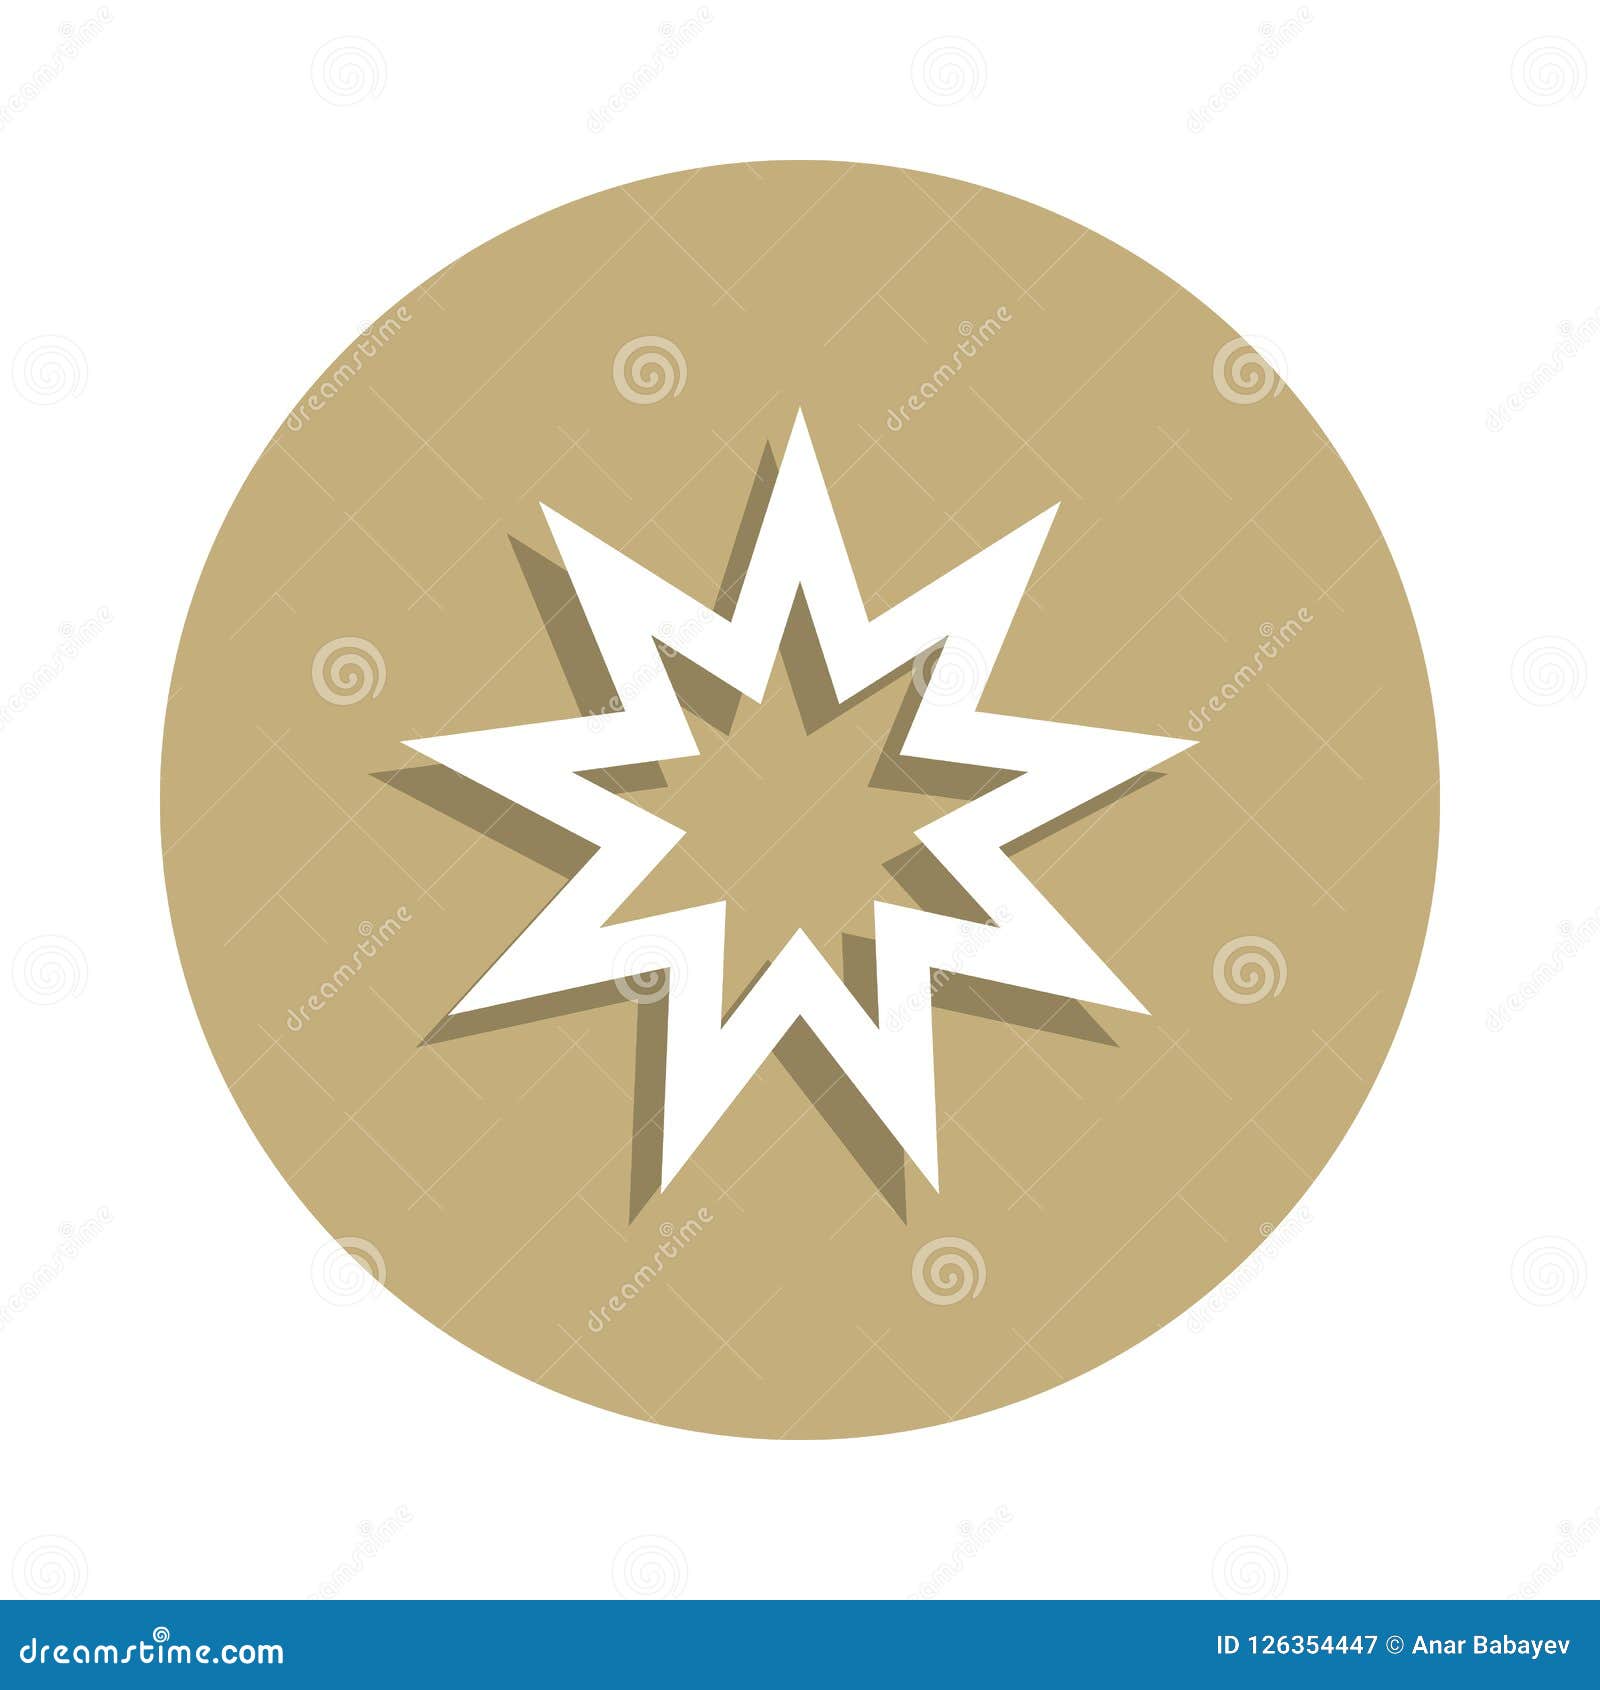 baha nine pointed star sign icon in badge style. one of religion  collection icon can be used for ui, ux